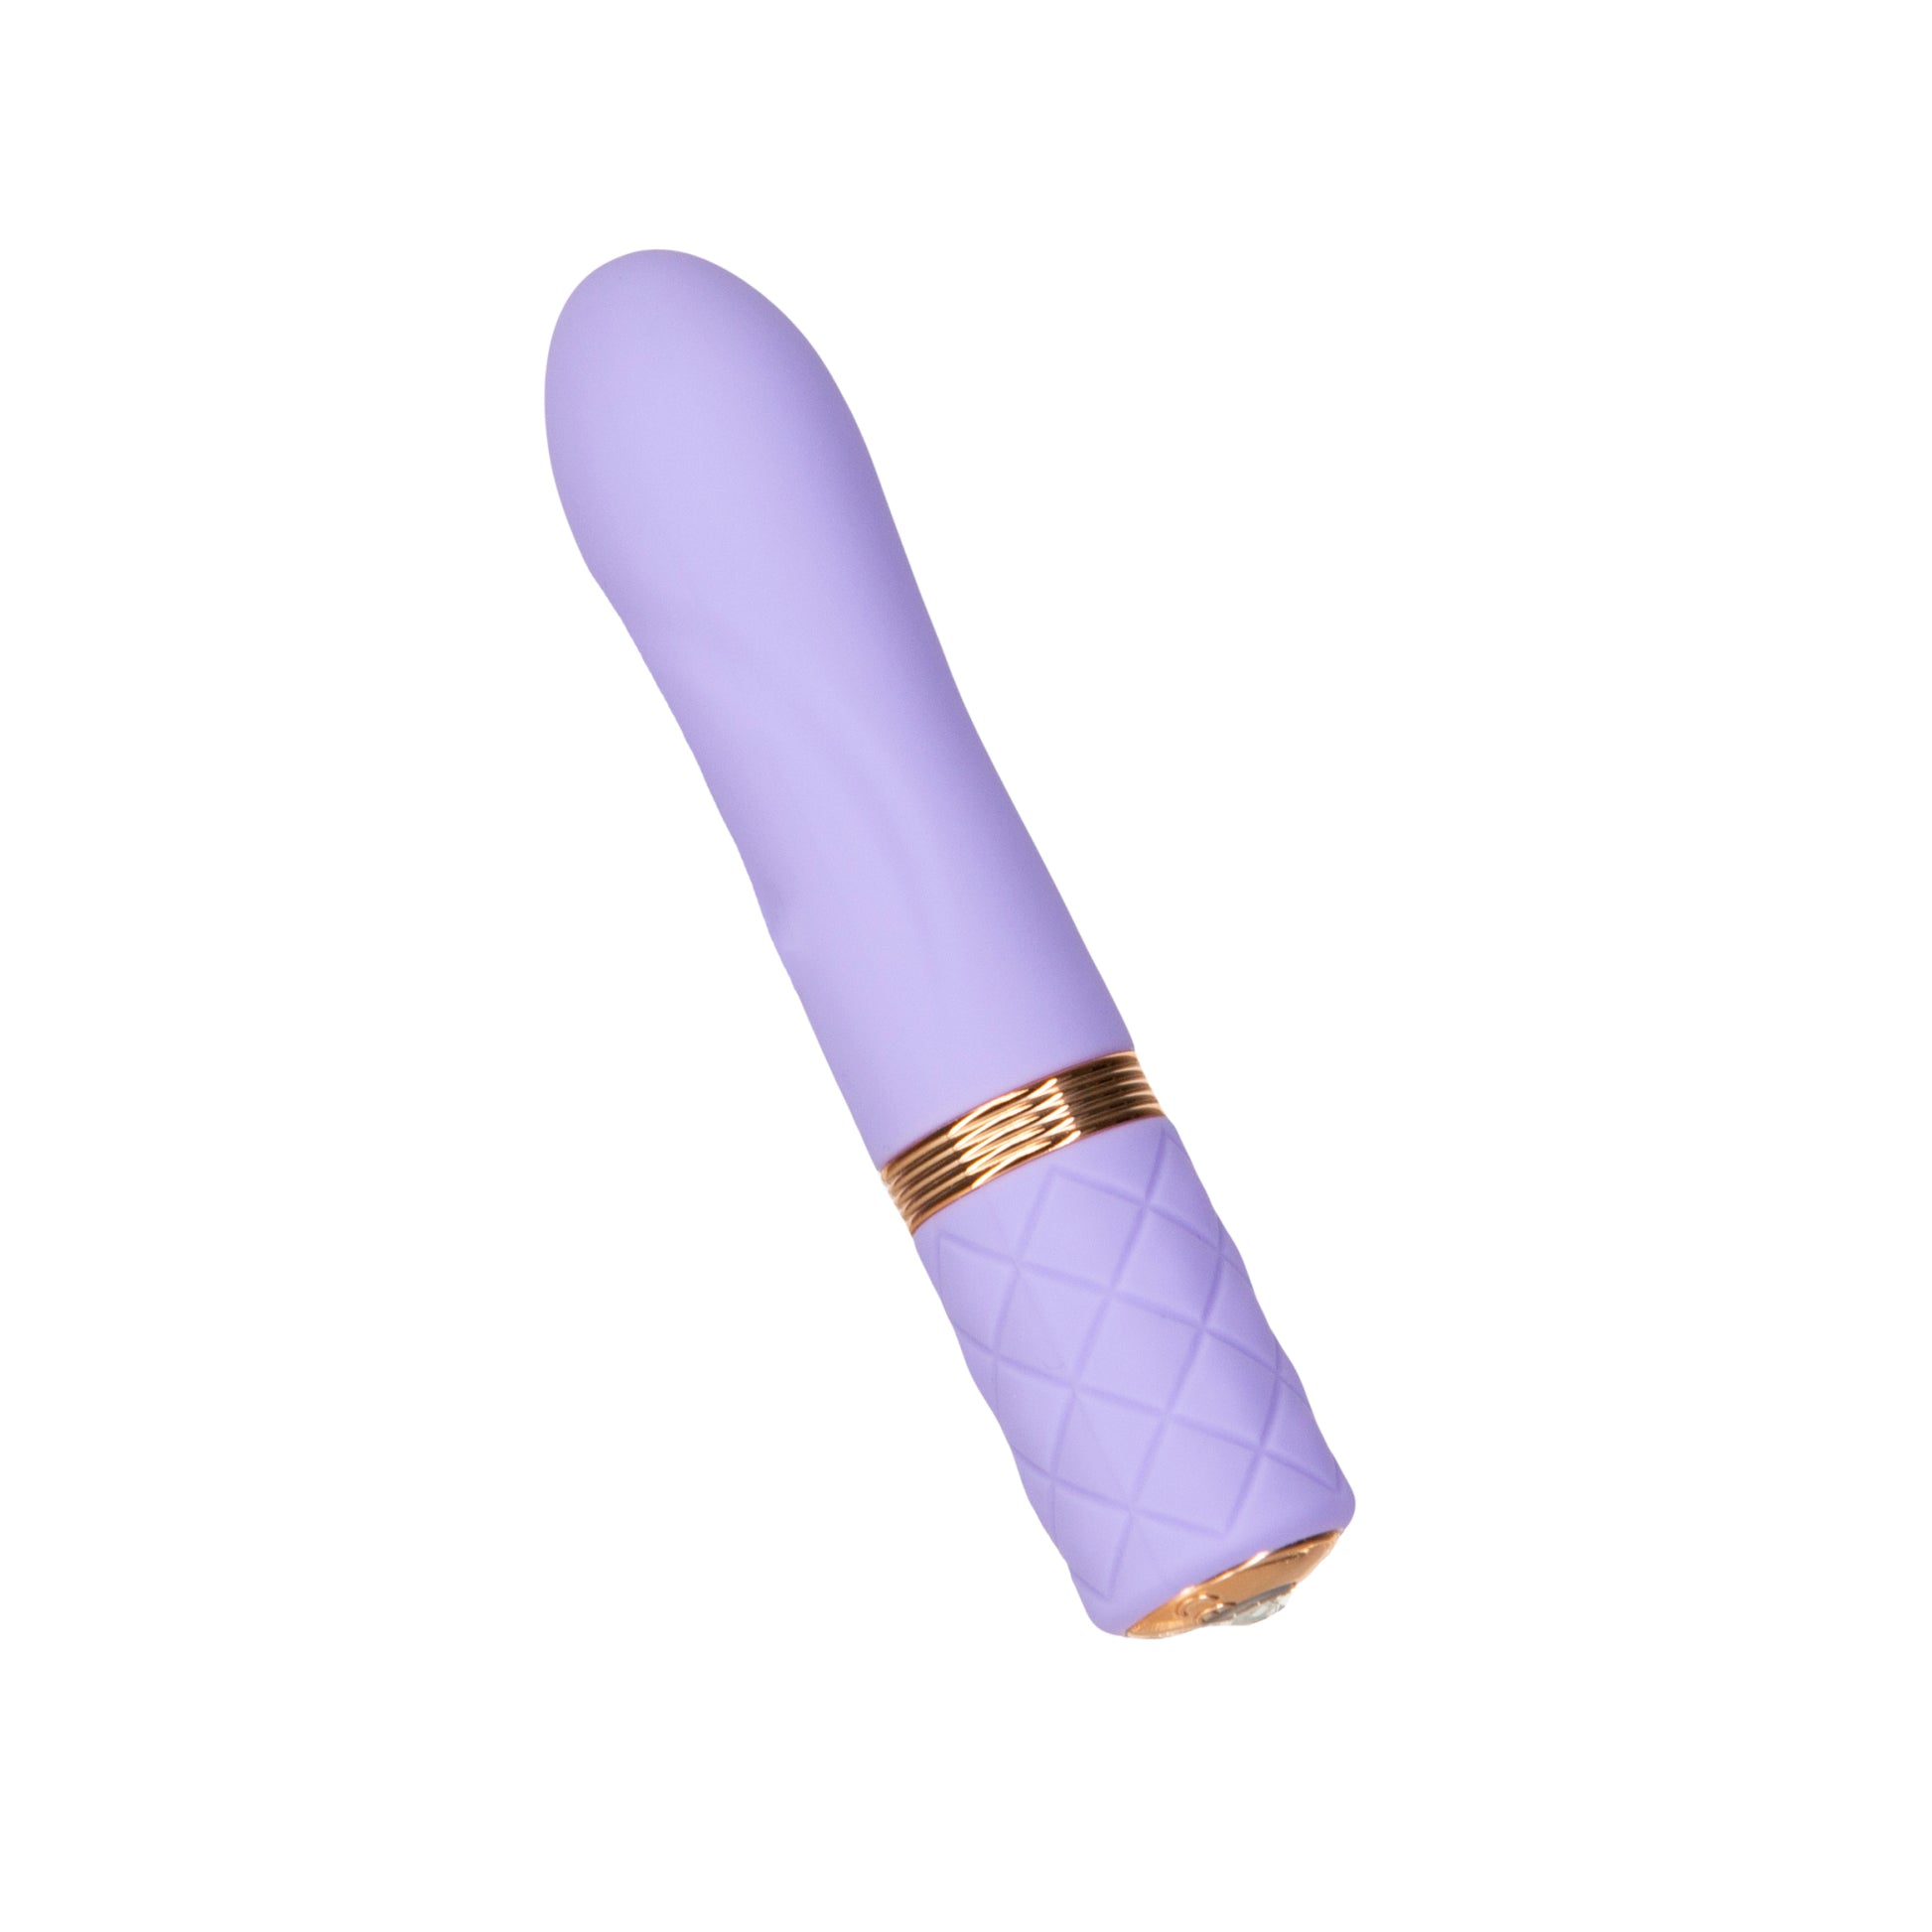 Side angle view of the bullet vibrator showing its size and textured handle (purple).